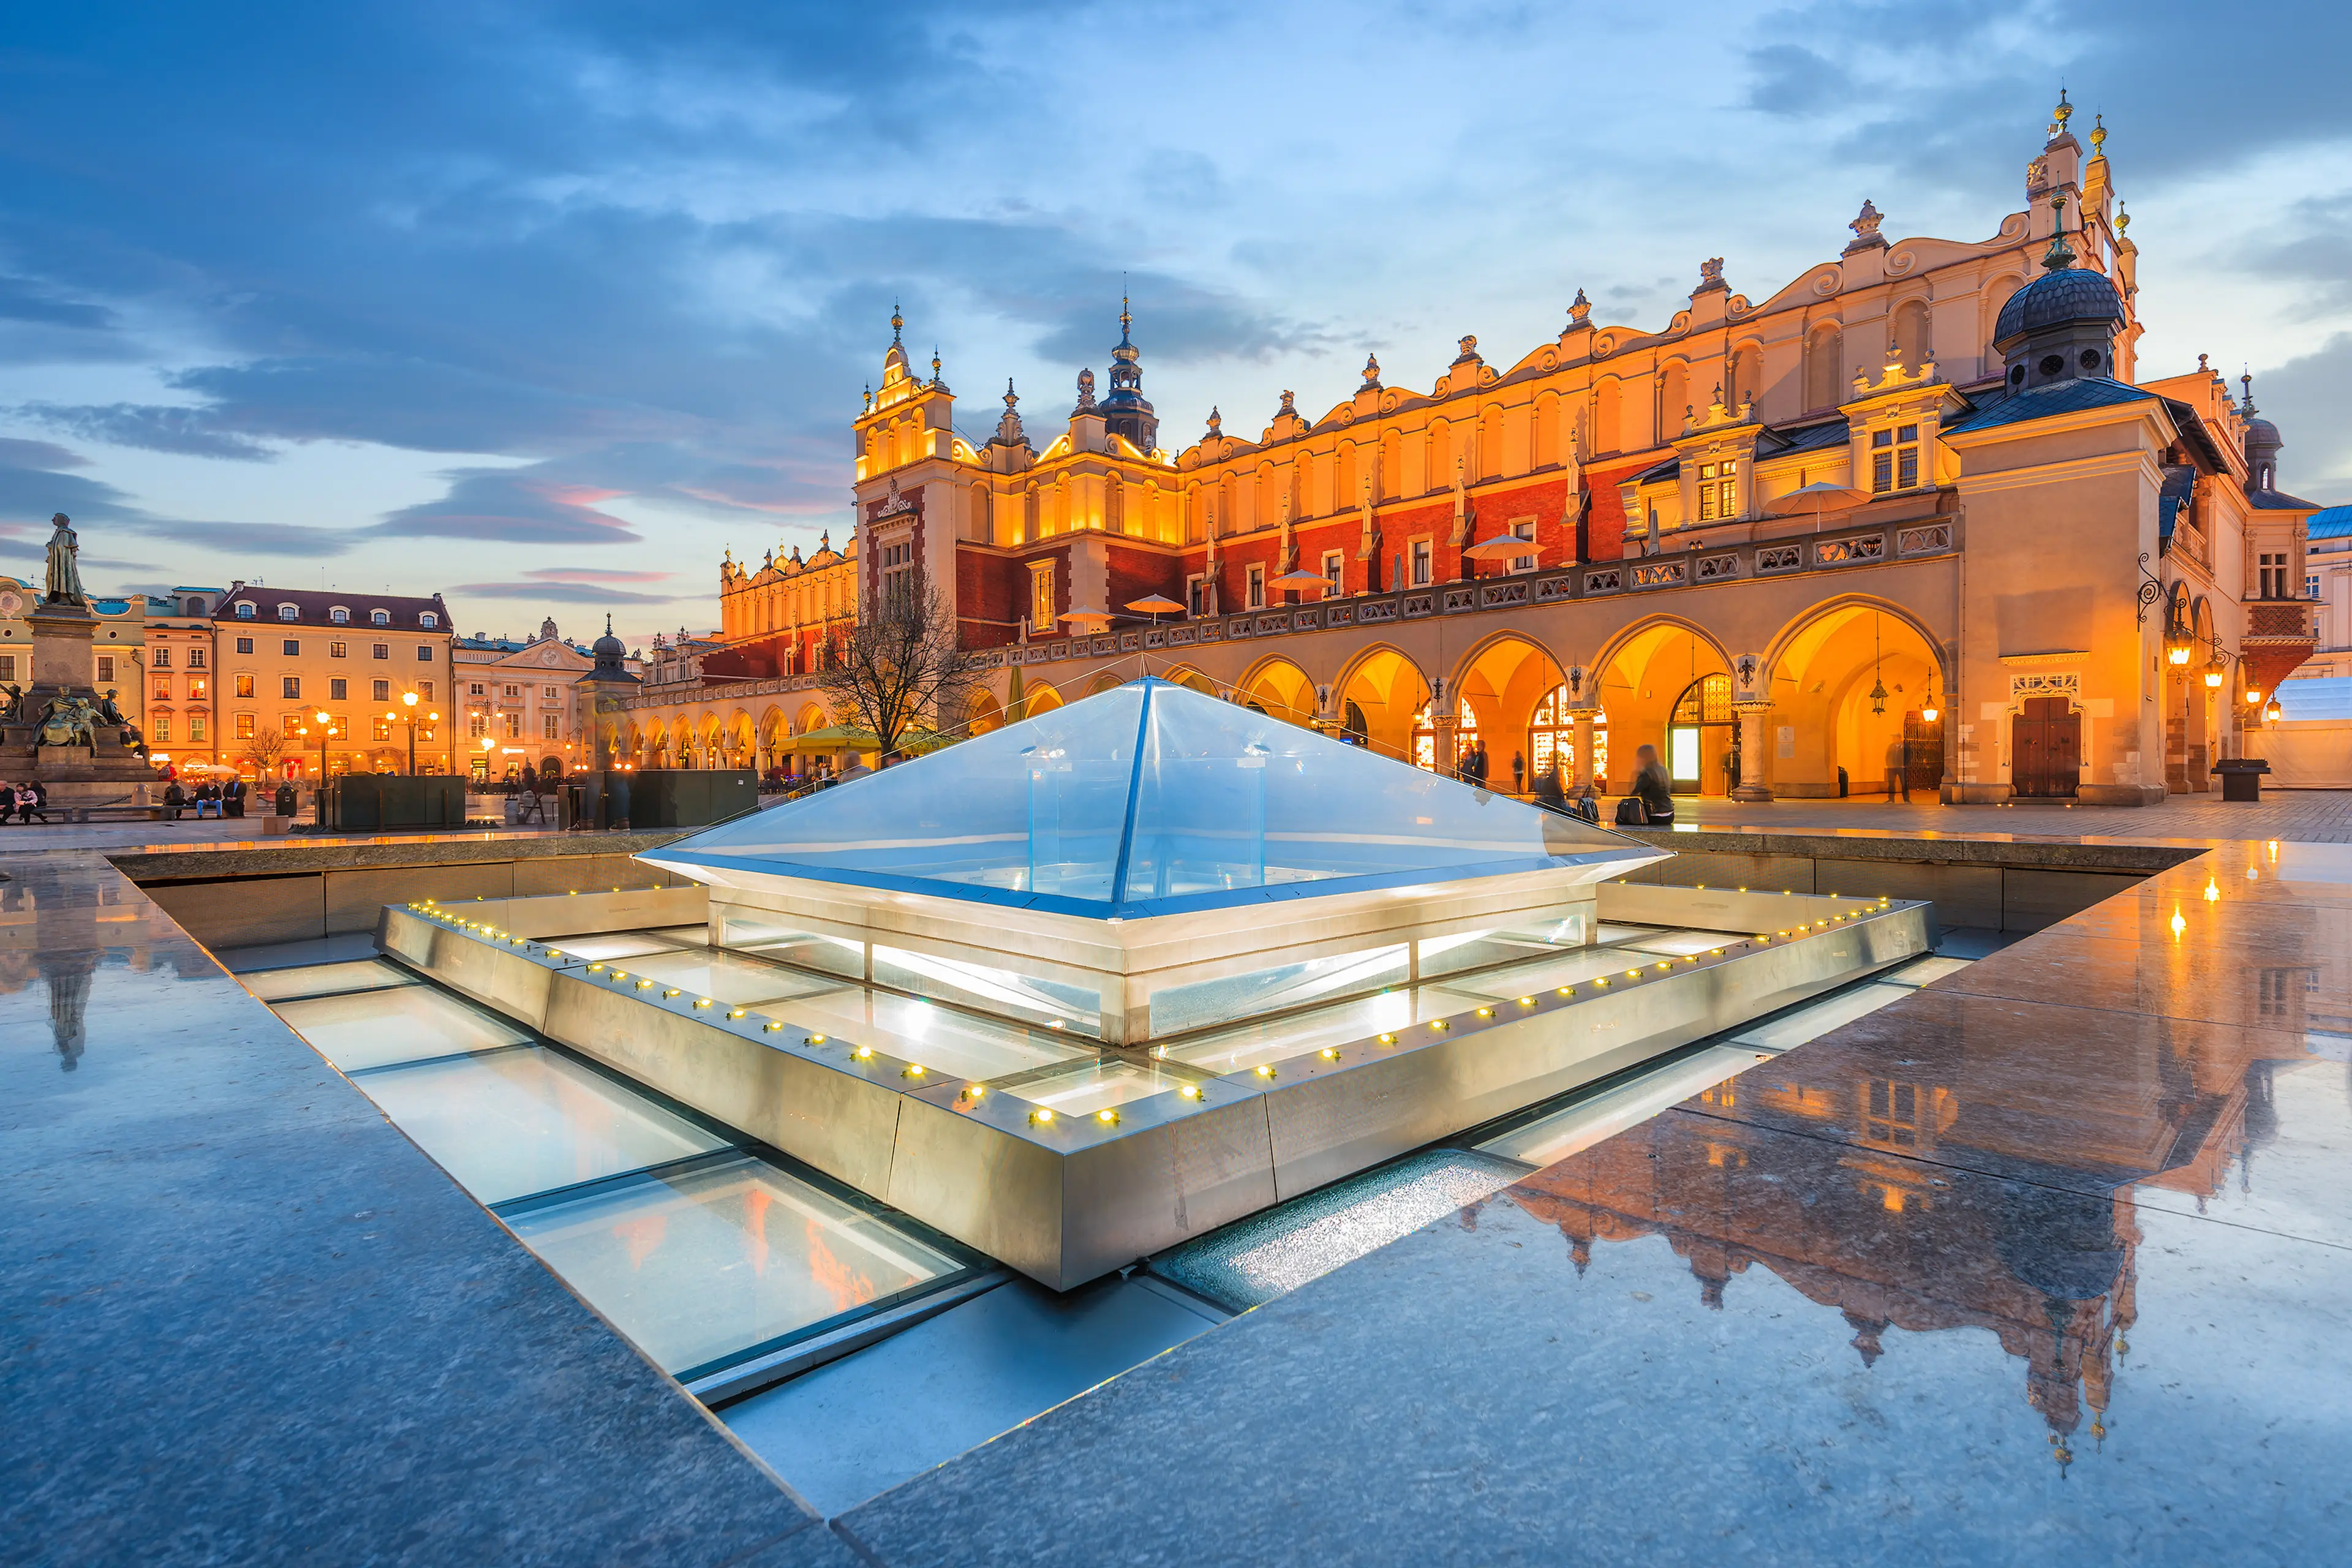 Solo 1-Day Local Experience of Krakow: Sightseeing, Food and Wine